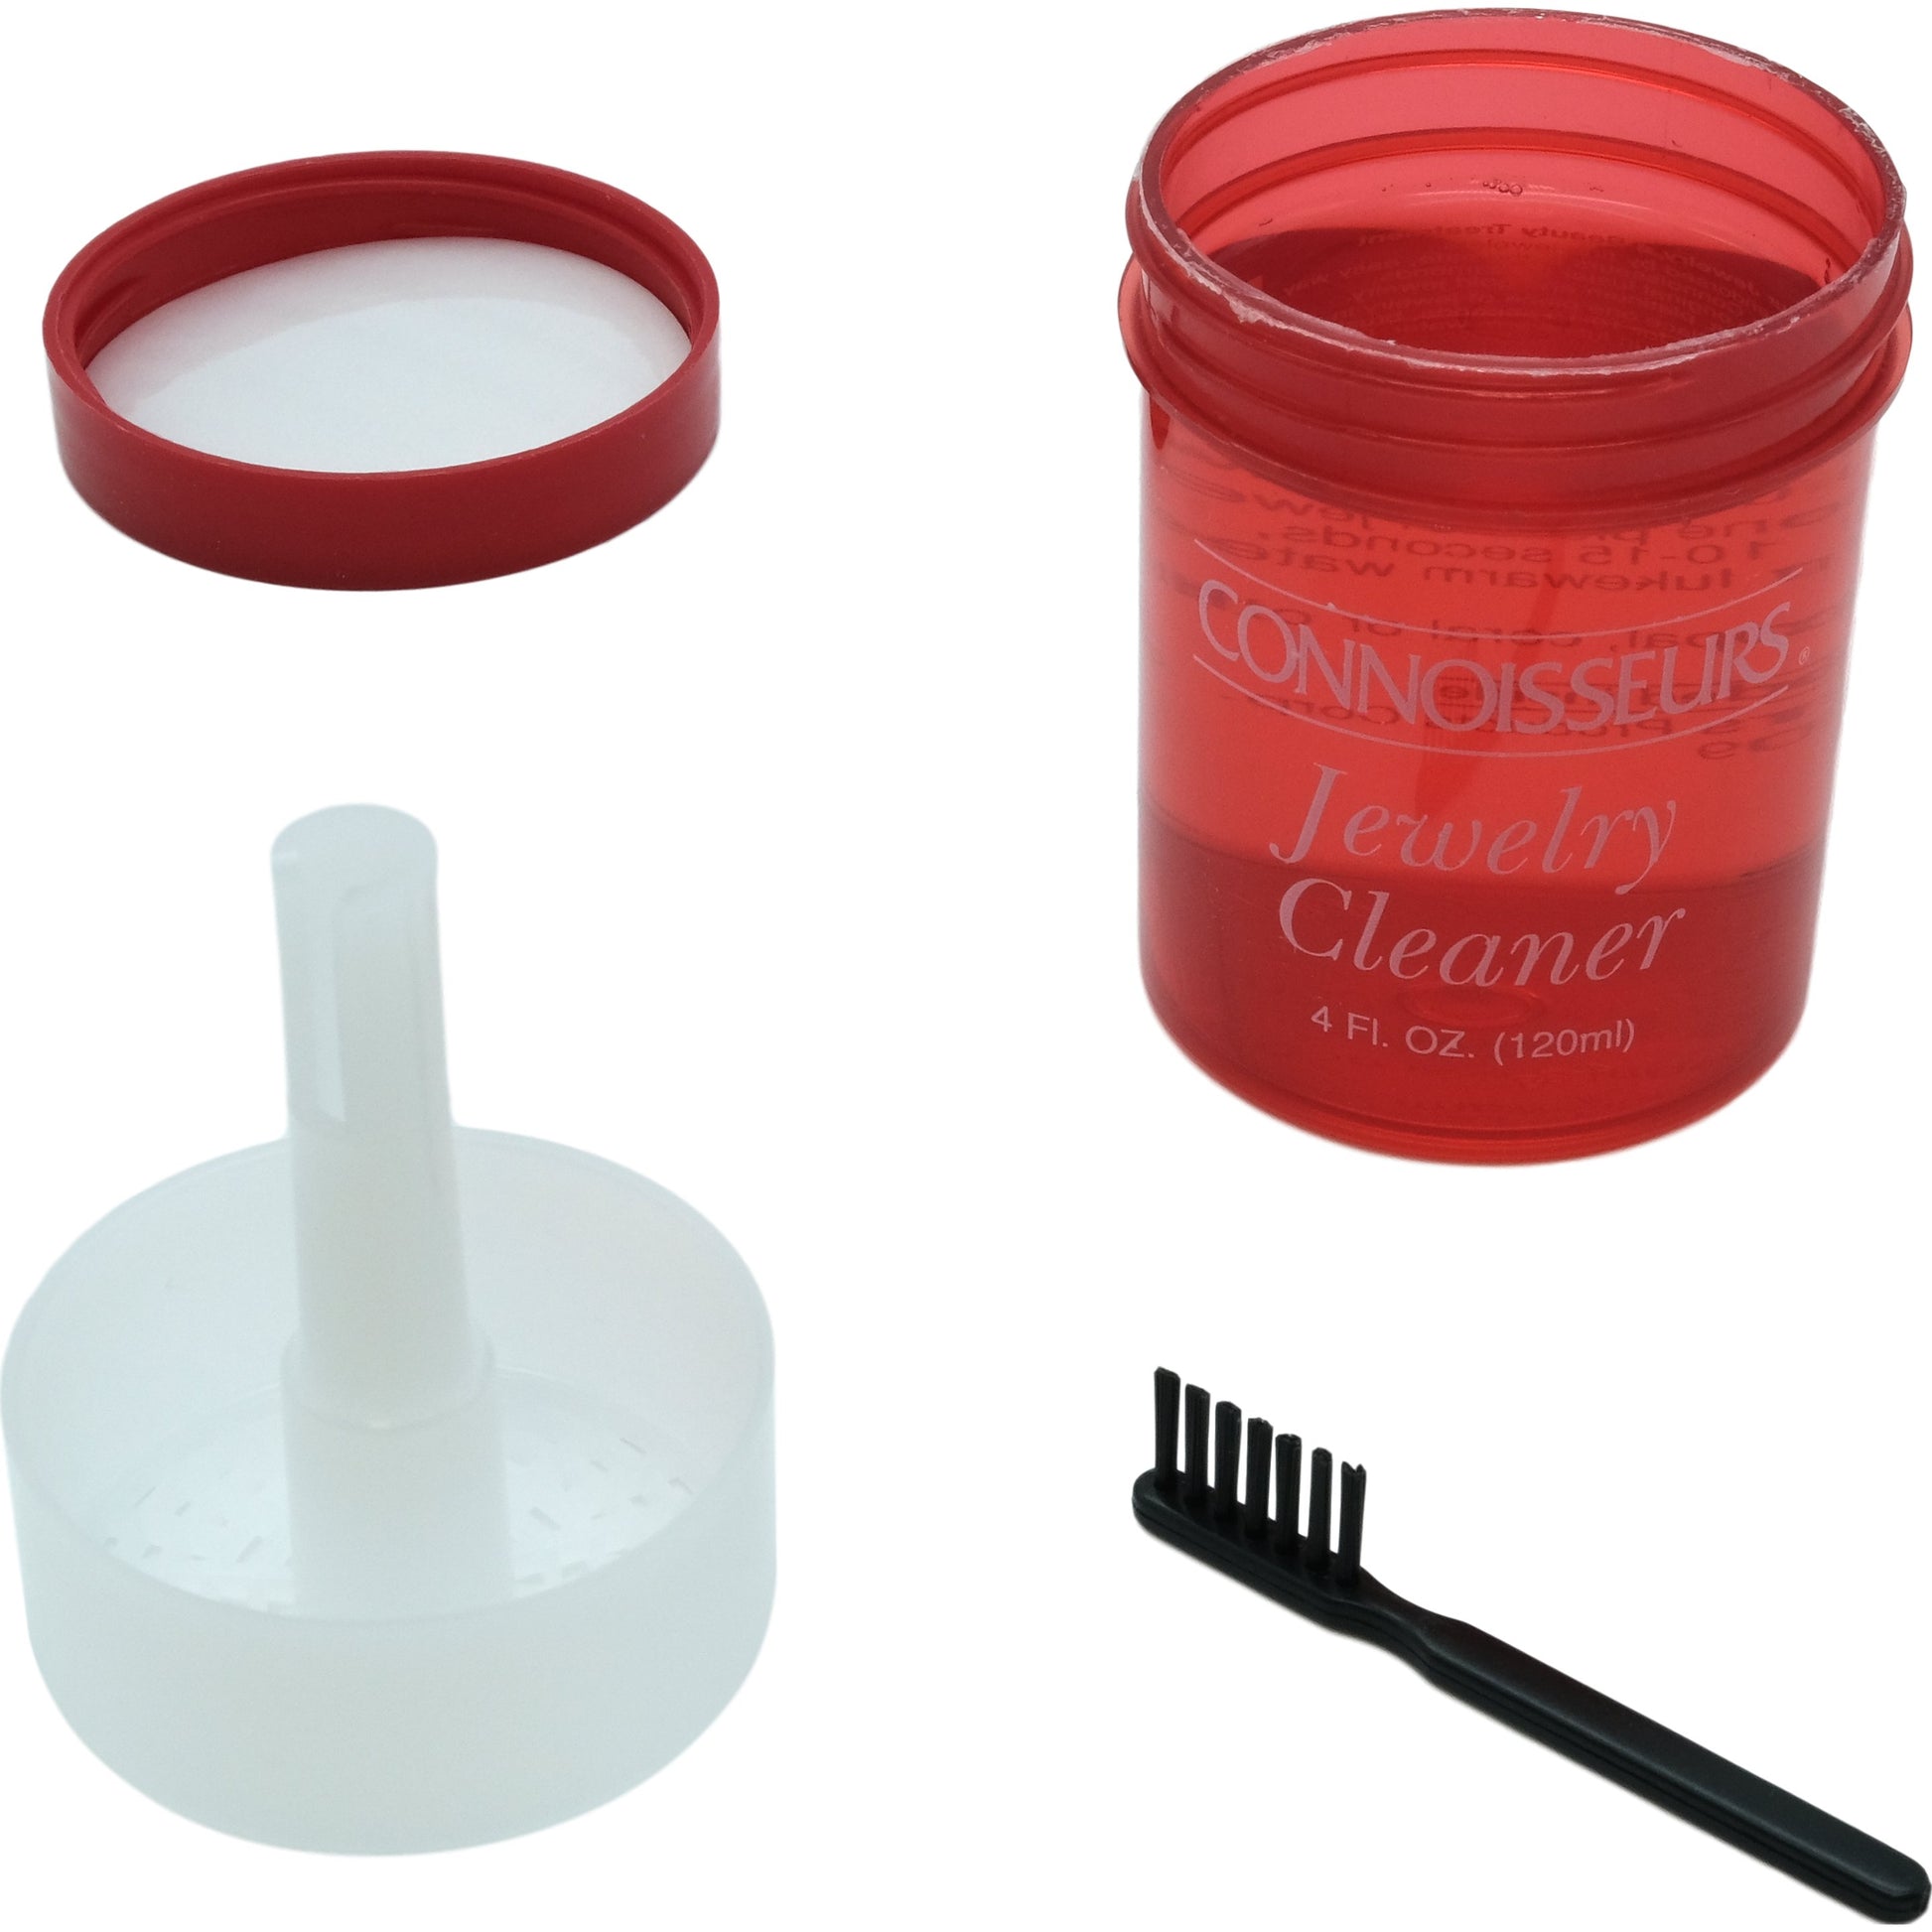 Connoisseurs Precious Jewelry Cleaner 